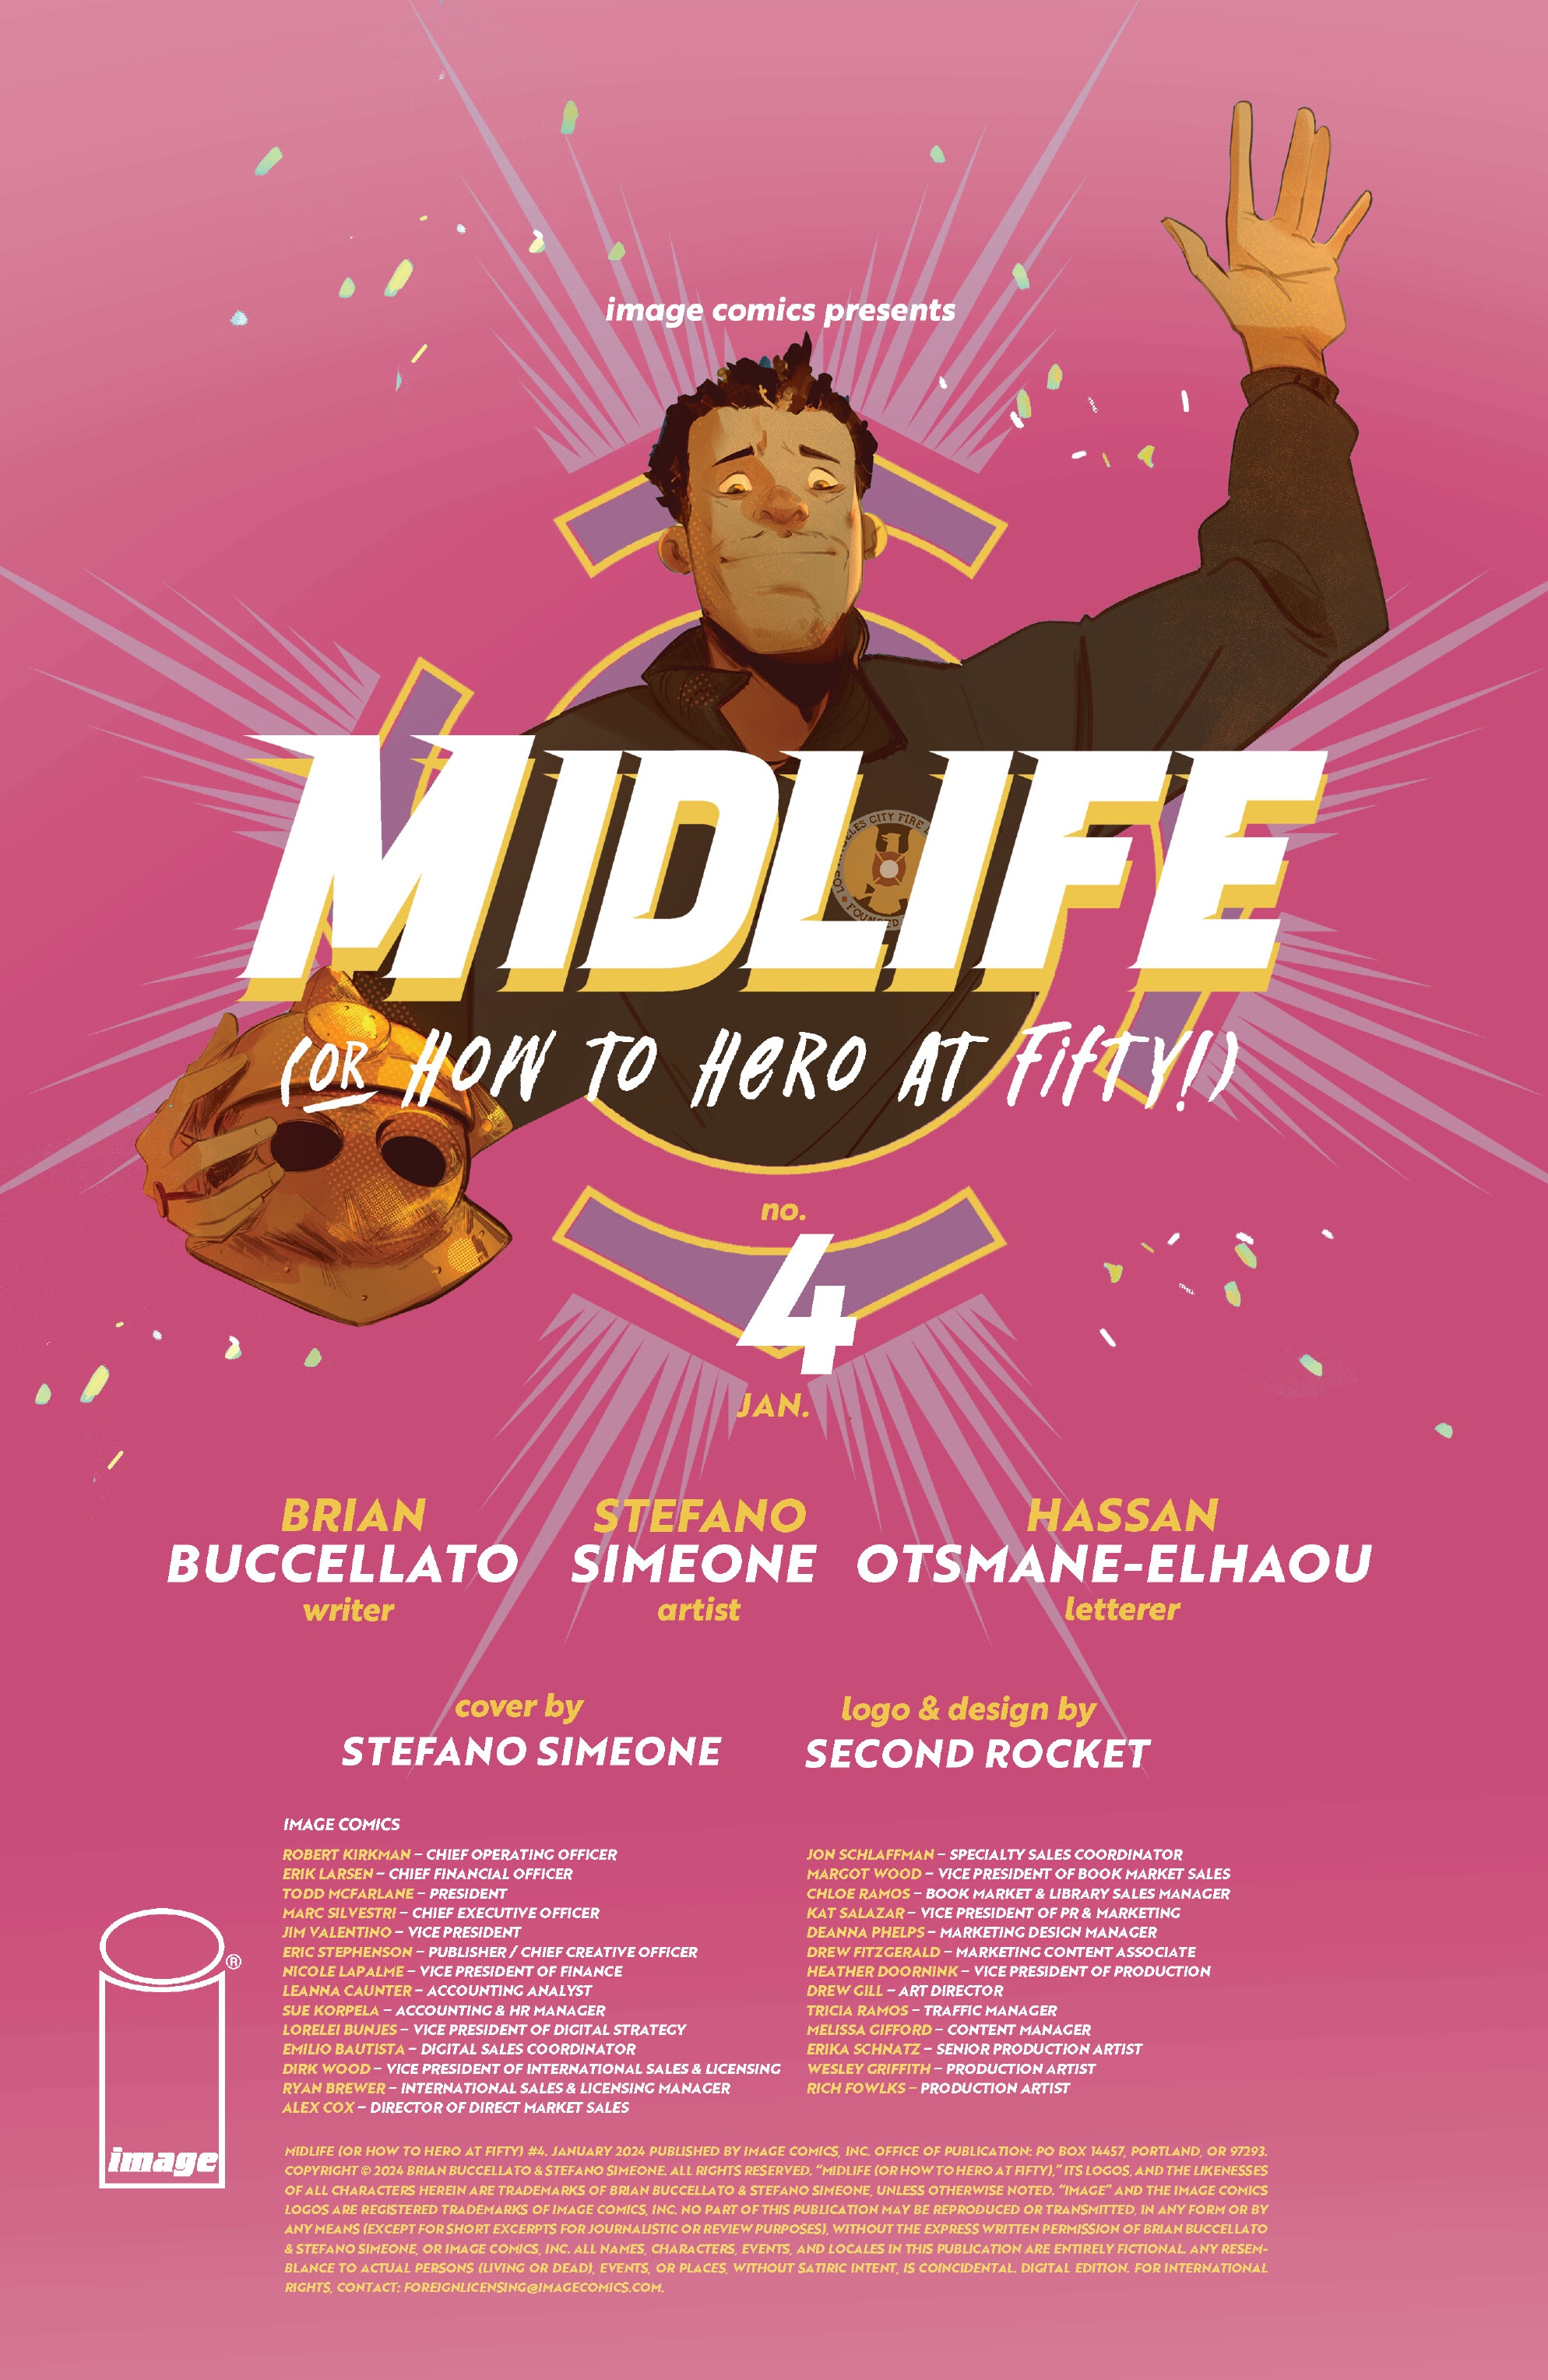 Read online Midlife (or How to Hero at Fifty!) comic -  Issue #4 - 2